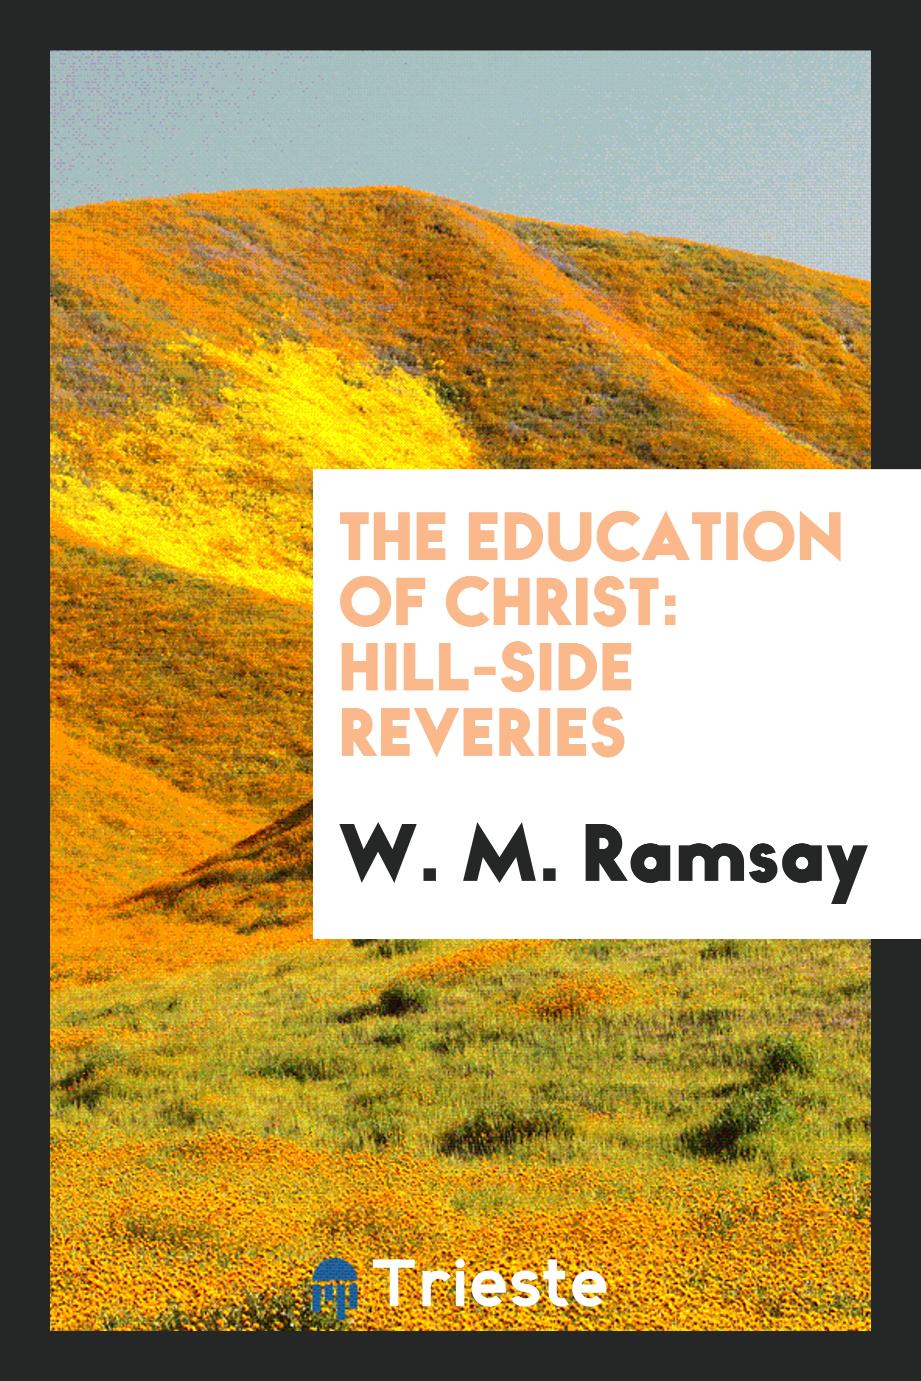 The Education of Christ: Hill-Side Reveries